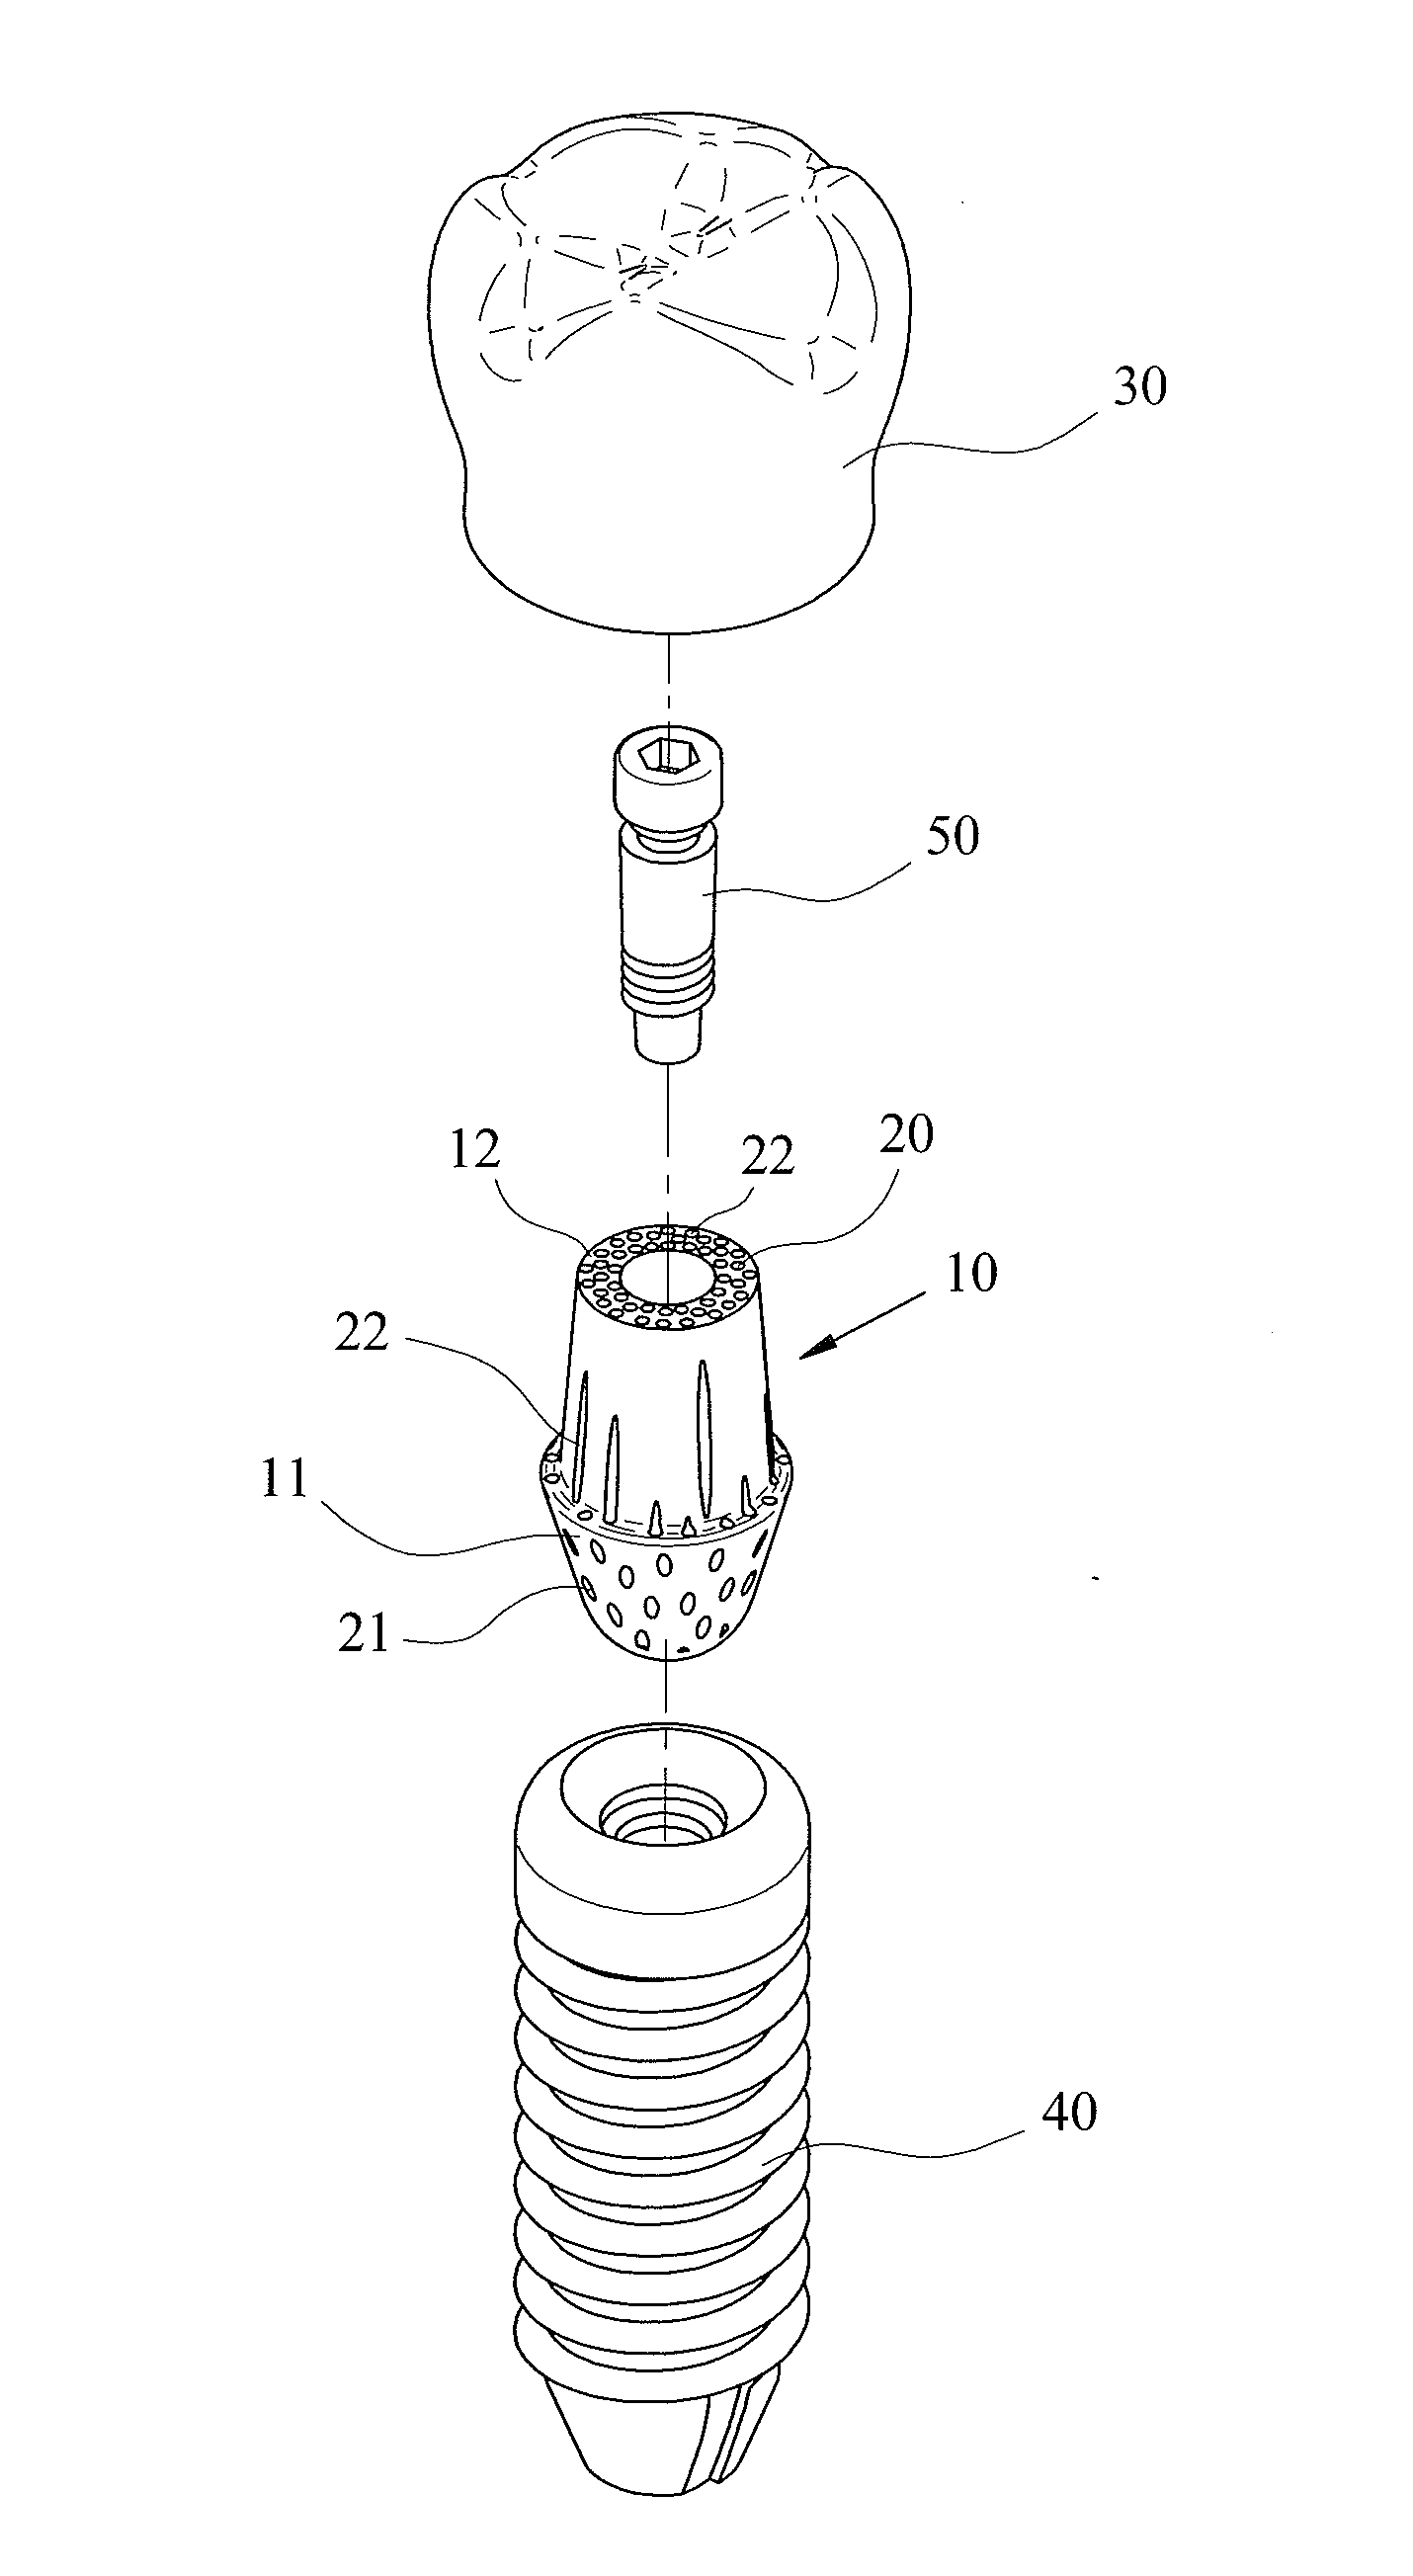 Fiber Abutment Material and Structure of Dental Implant